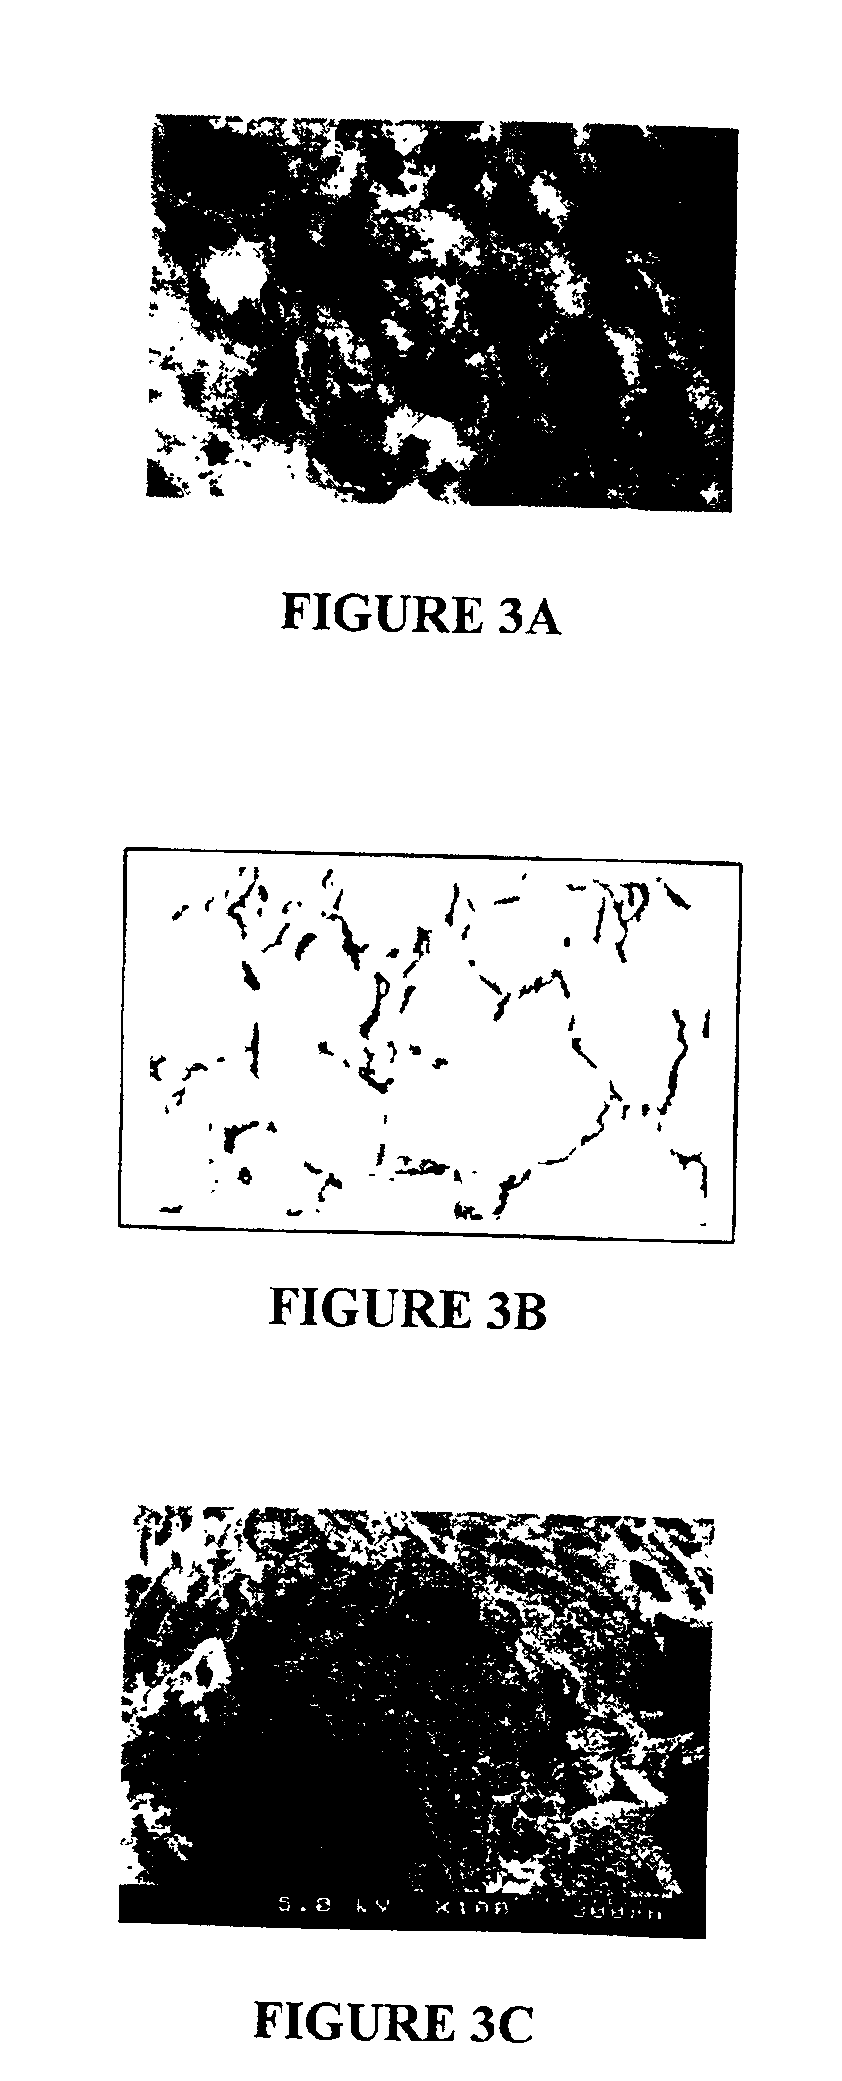 Macroporous polymer scaffold containing calcium phosphate particles